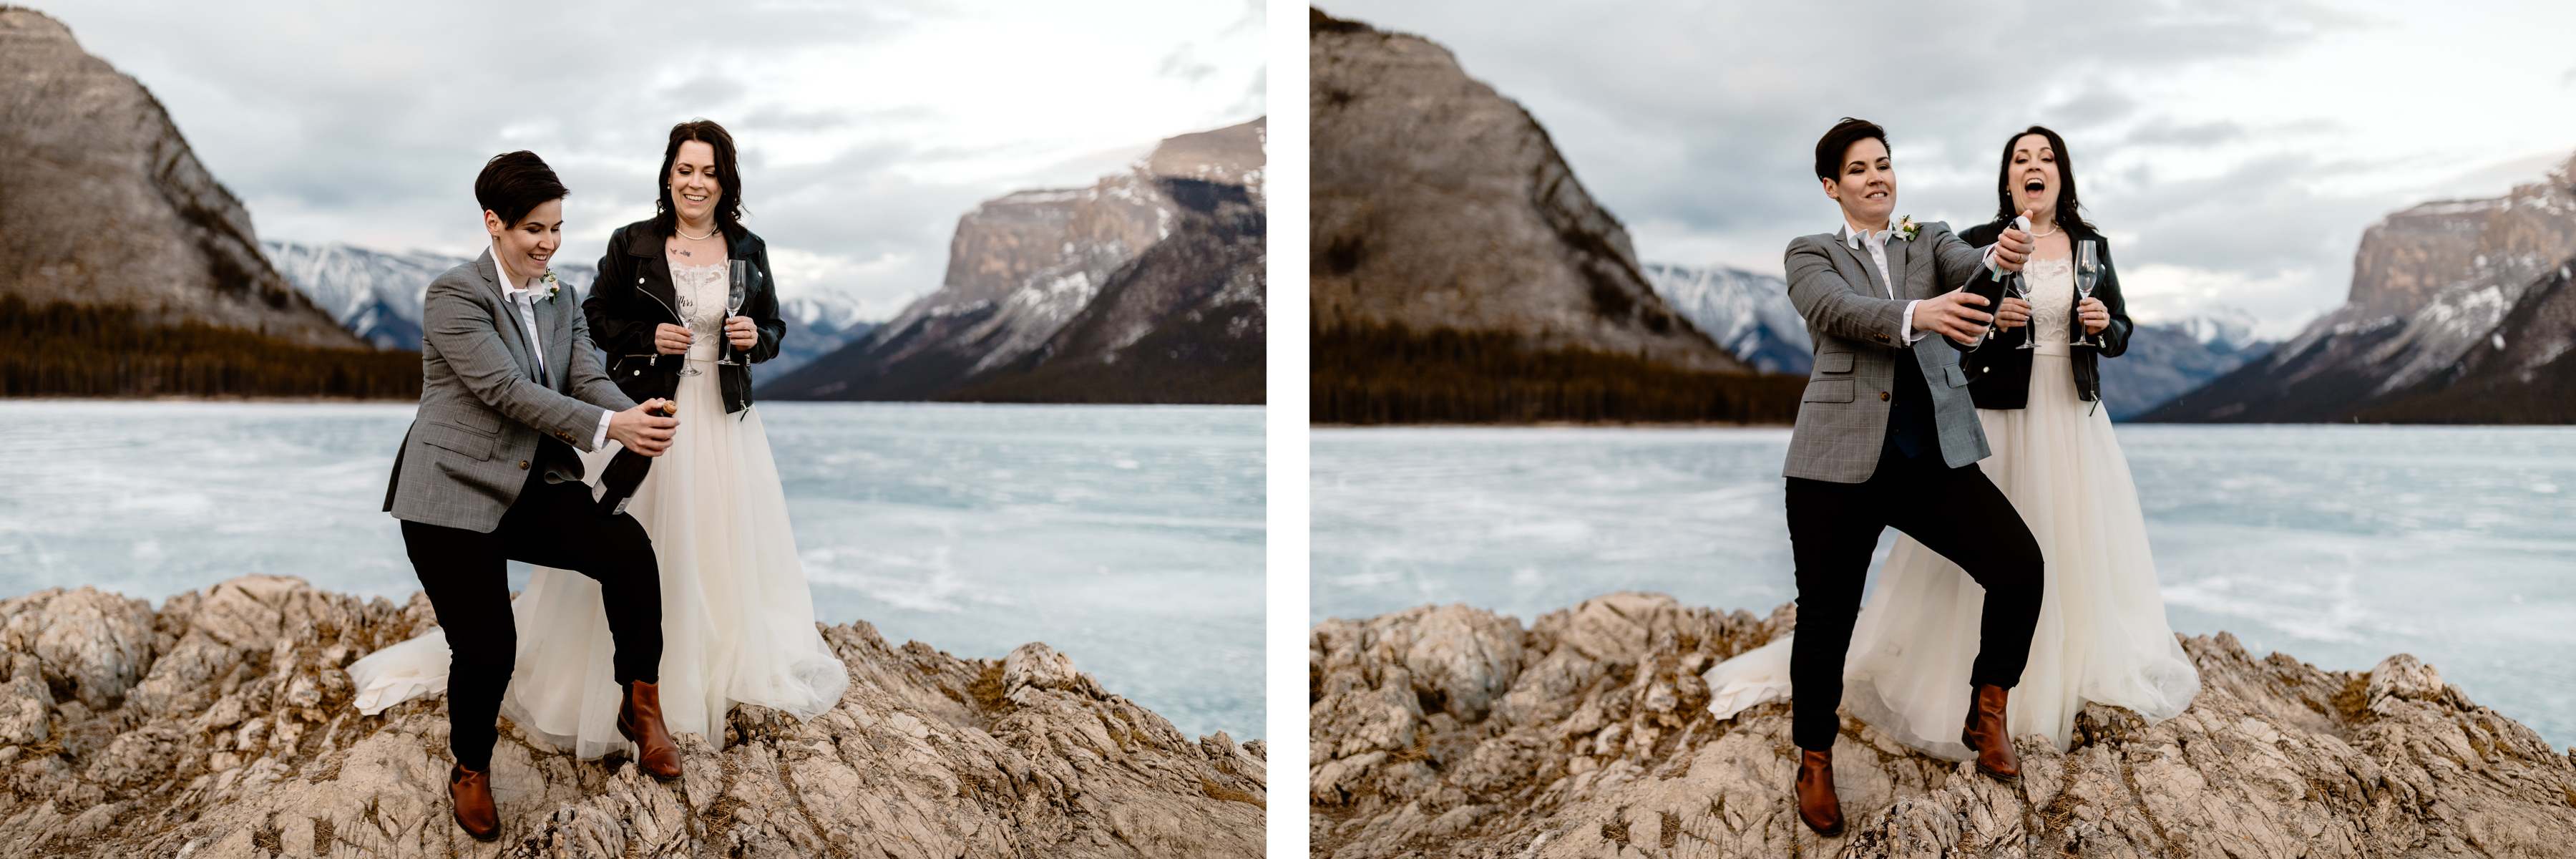 Banff National Park Elopement Photography with LGBTQ-friendly photographers - Image 33